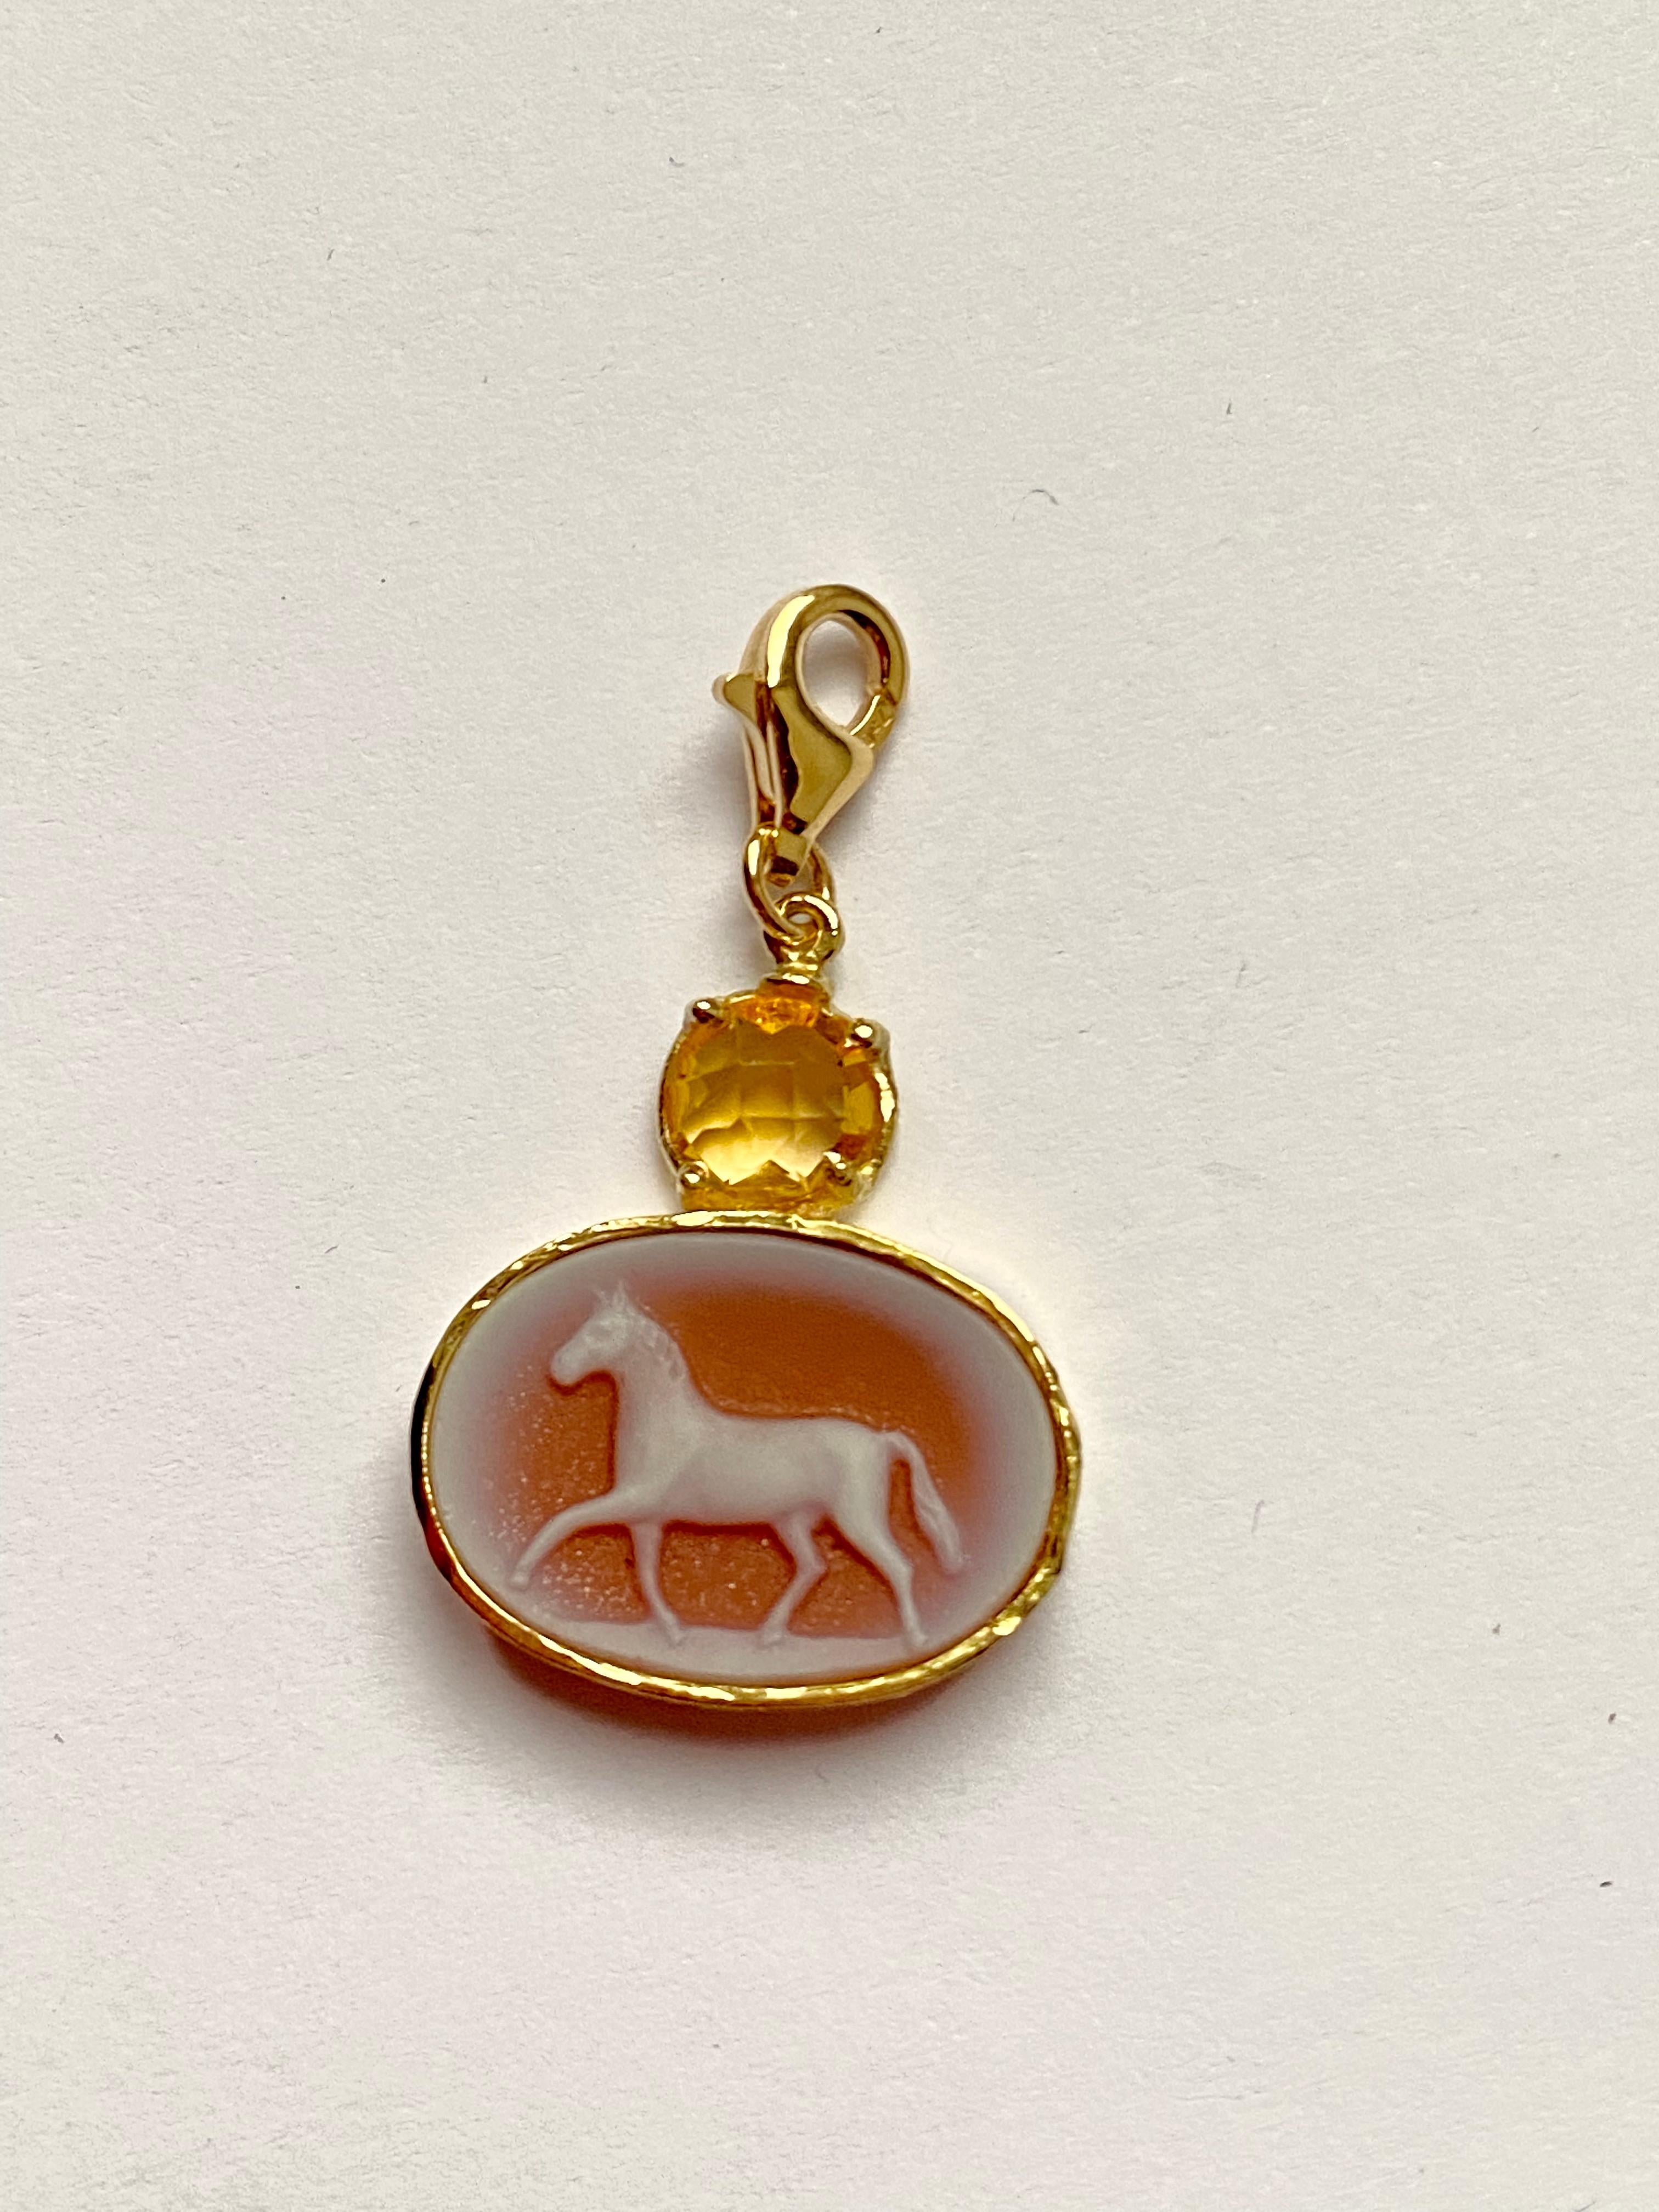 Handcrafted 18 Karats Yellow Gold Hammered Bezel Carnelian and Citrine Horse Charme Pendant 
A nice charme pendant handcrafted in 18 karats gold adorned with beautiful horse hand carved carnelian with a hammered gold bezel and a round citrine